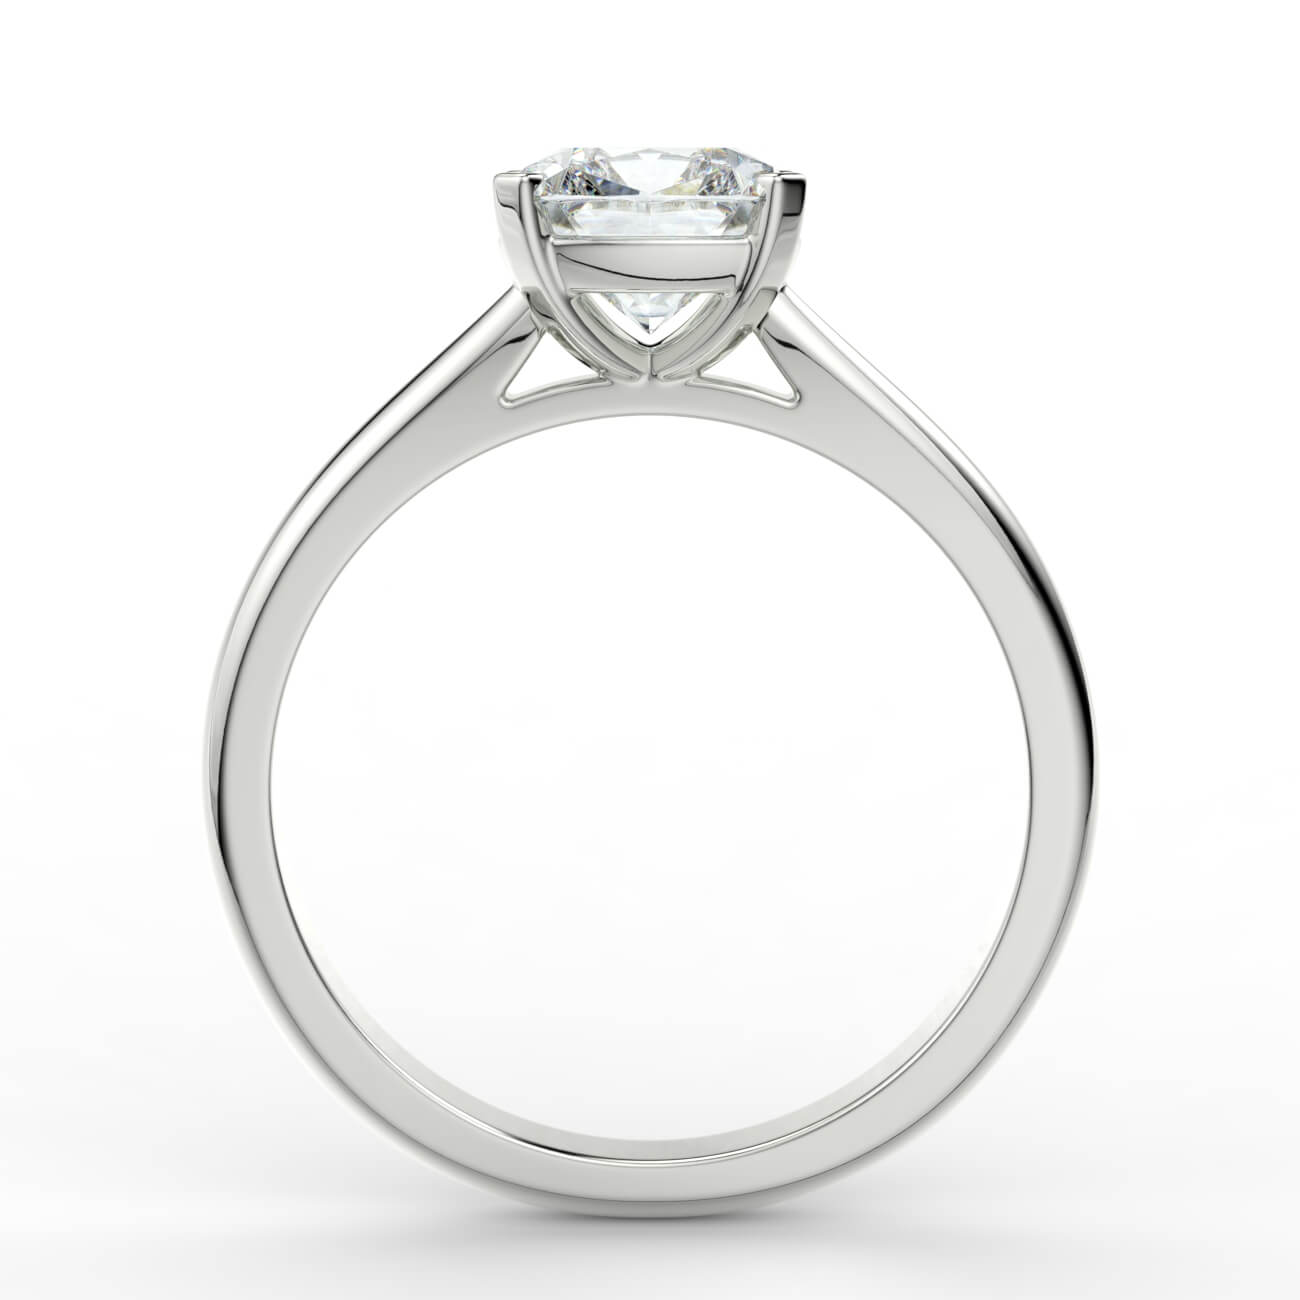 Cushion cut diamond cathedral engagement ring in white gold – Australian Diamond Network